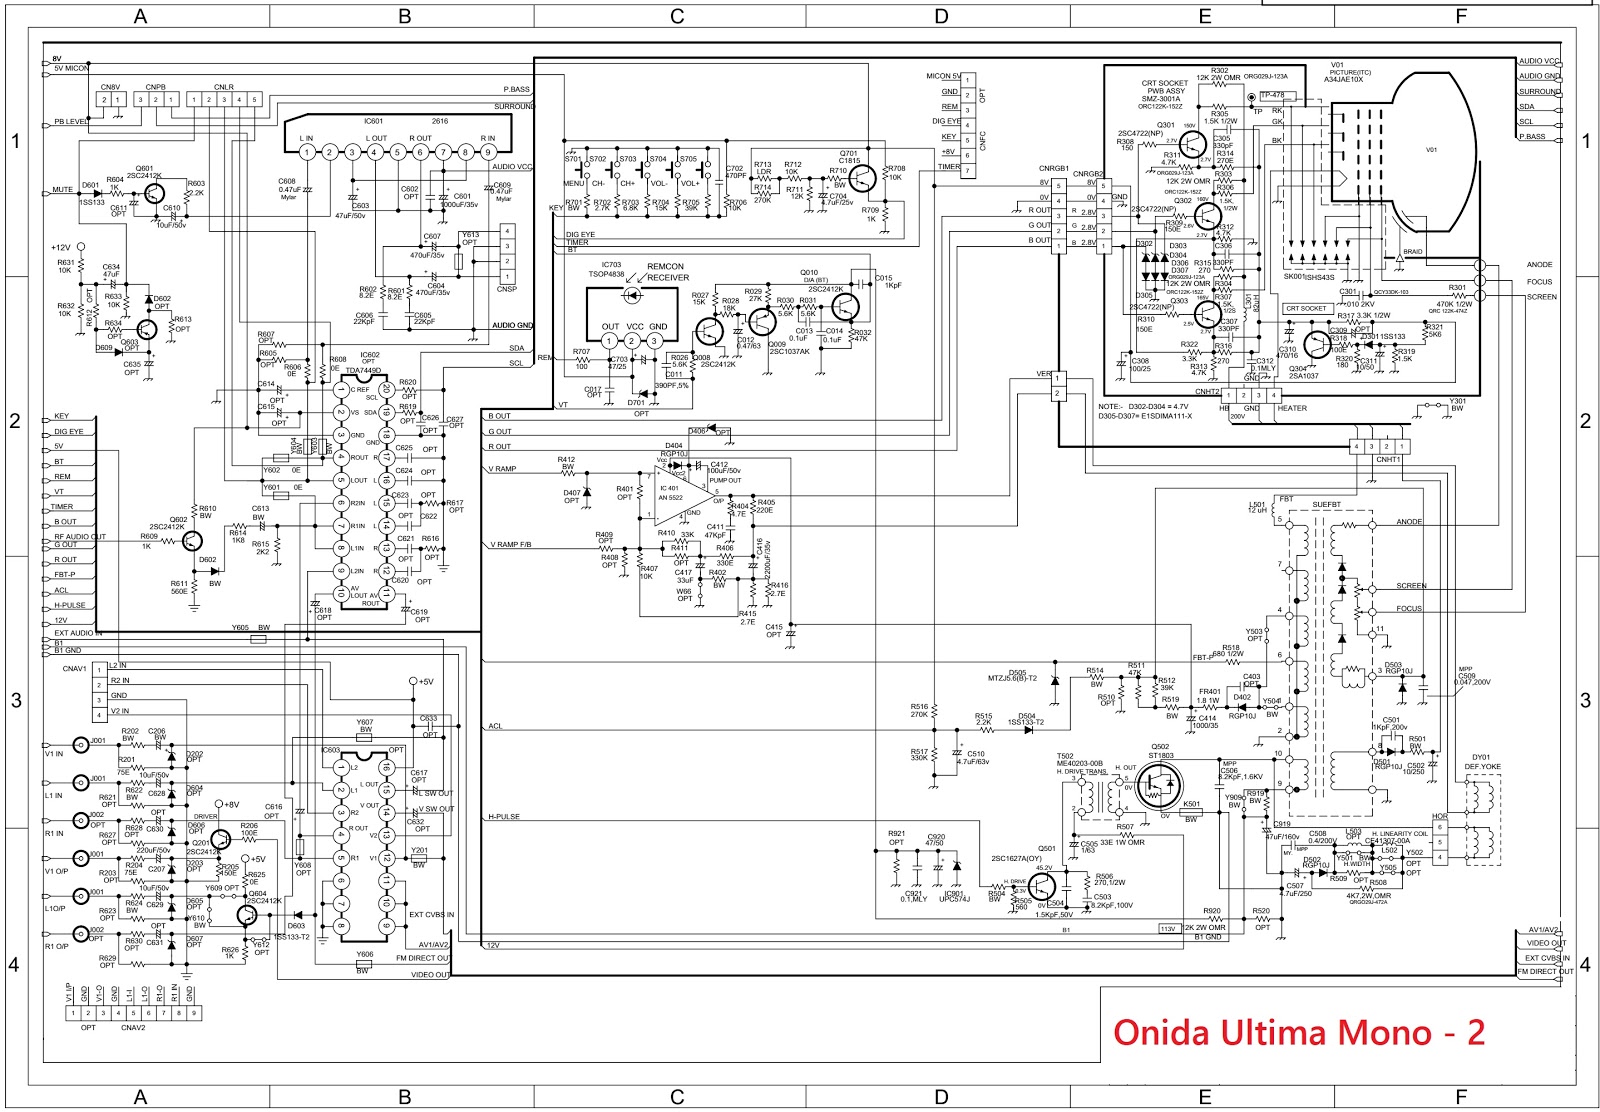 Electro help: Onida Ultima Chassis CRT TV Circuit Diagram - Channel